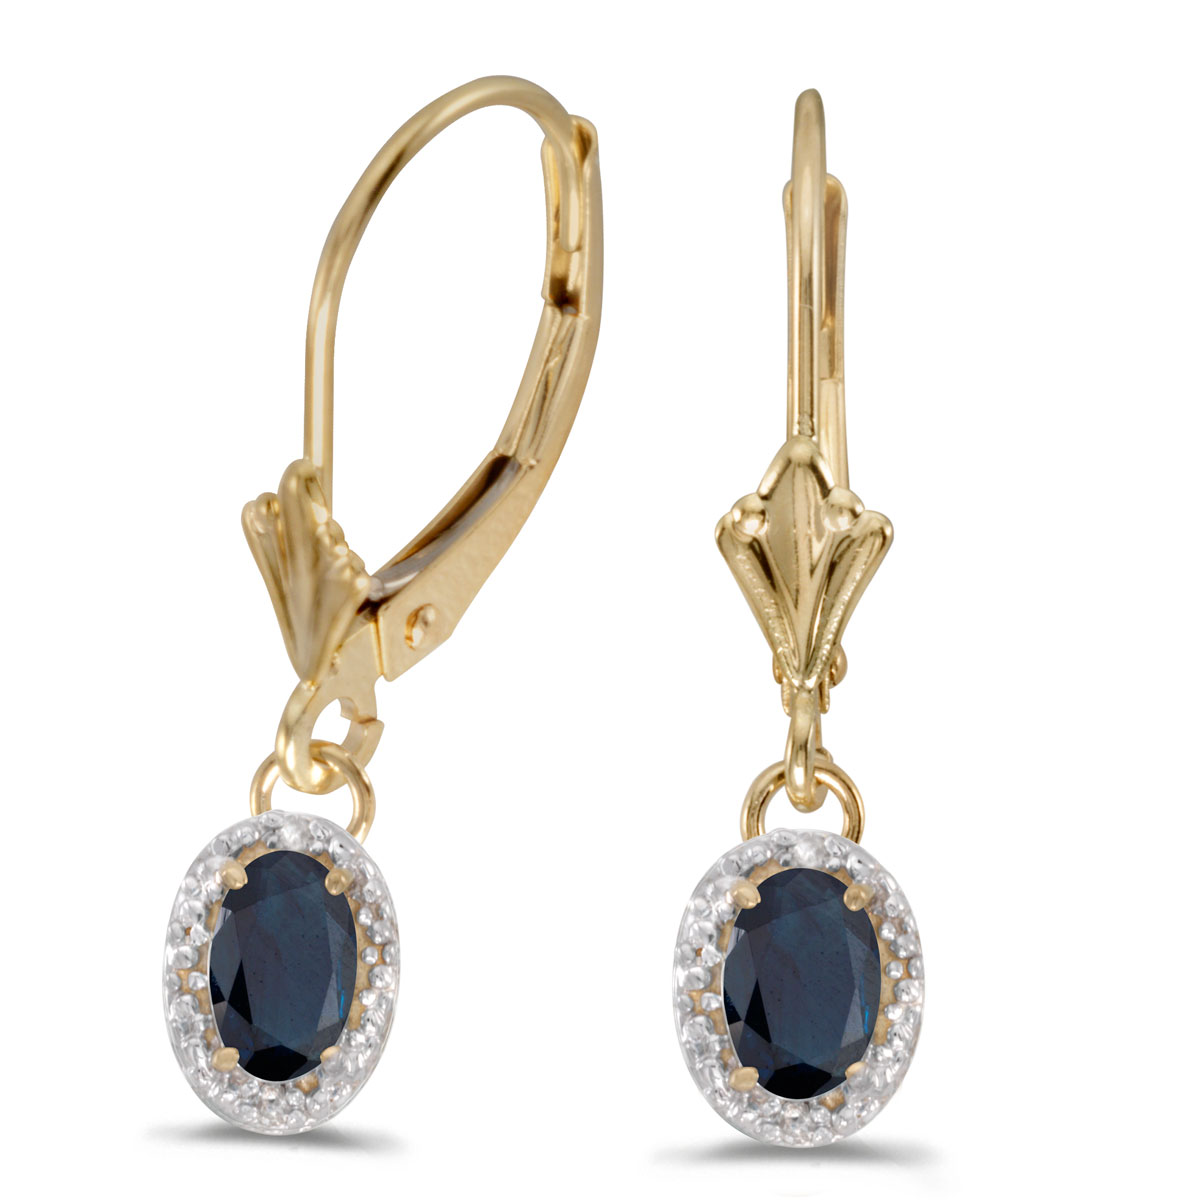 Beautiful 10k yellow gold leverback earrings with bold 6x4 mm sapphires complemented with bright diamonds.